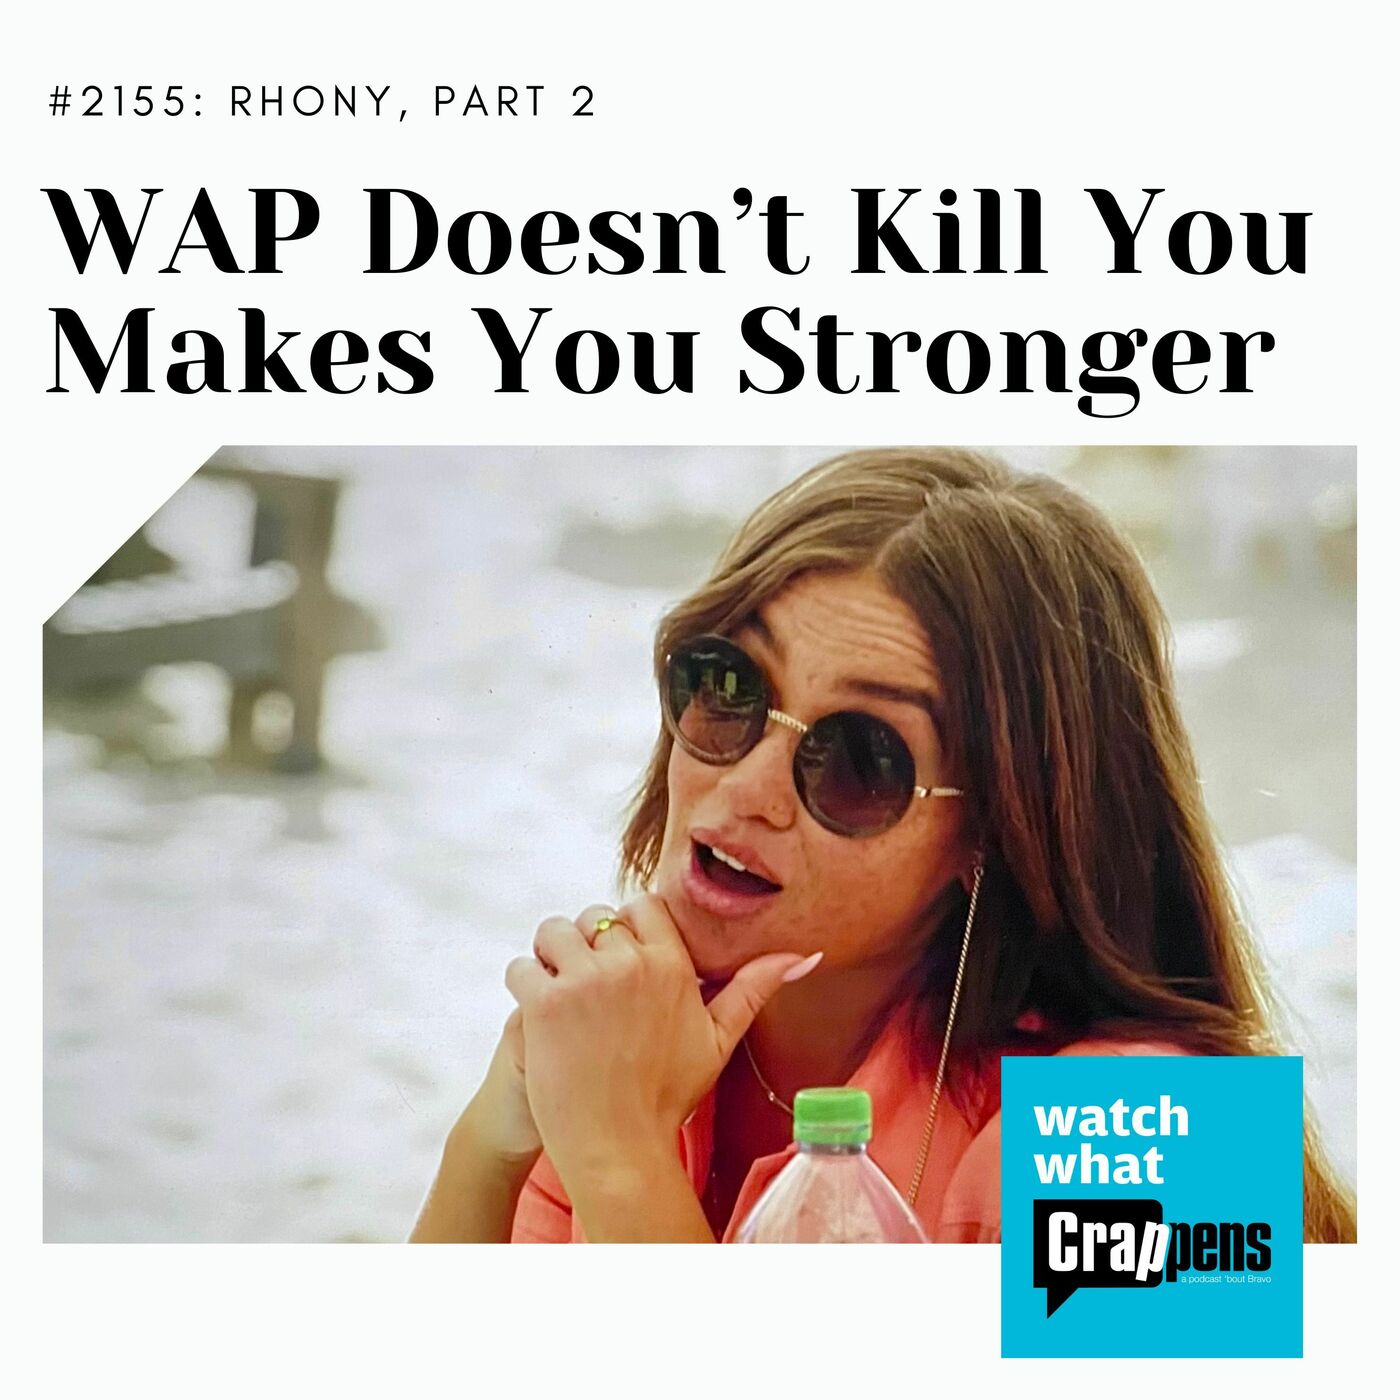 RHONY Part 2: WAP Doesn't Kill You Makes You Stronger